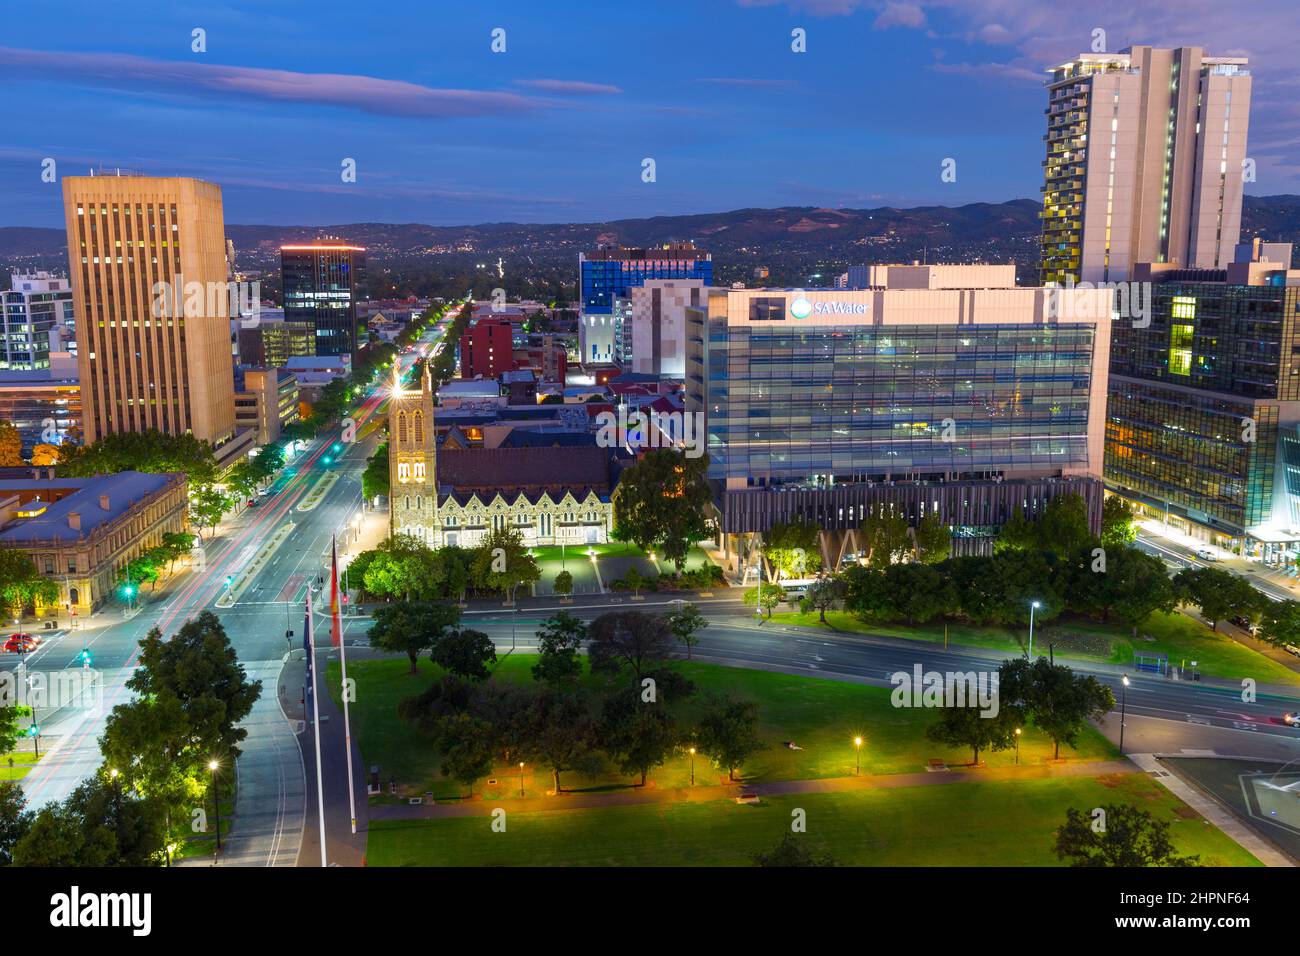 Adelaide, South Australia, seen by night from Victoria Square looking east along Wakefield Street, with the Mount Lofty Ranges in the background. Stock Photo